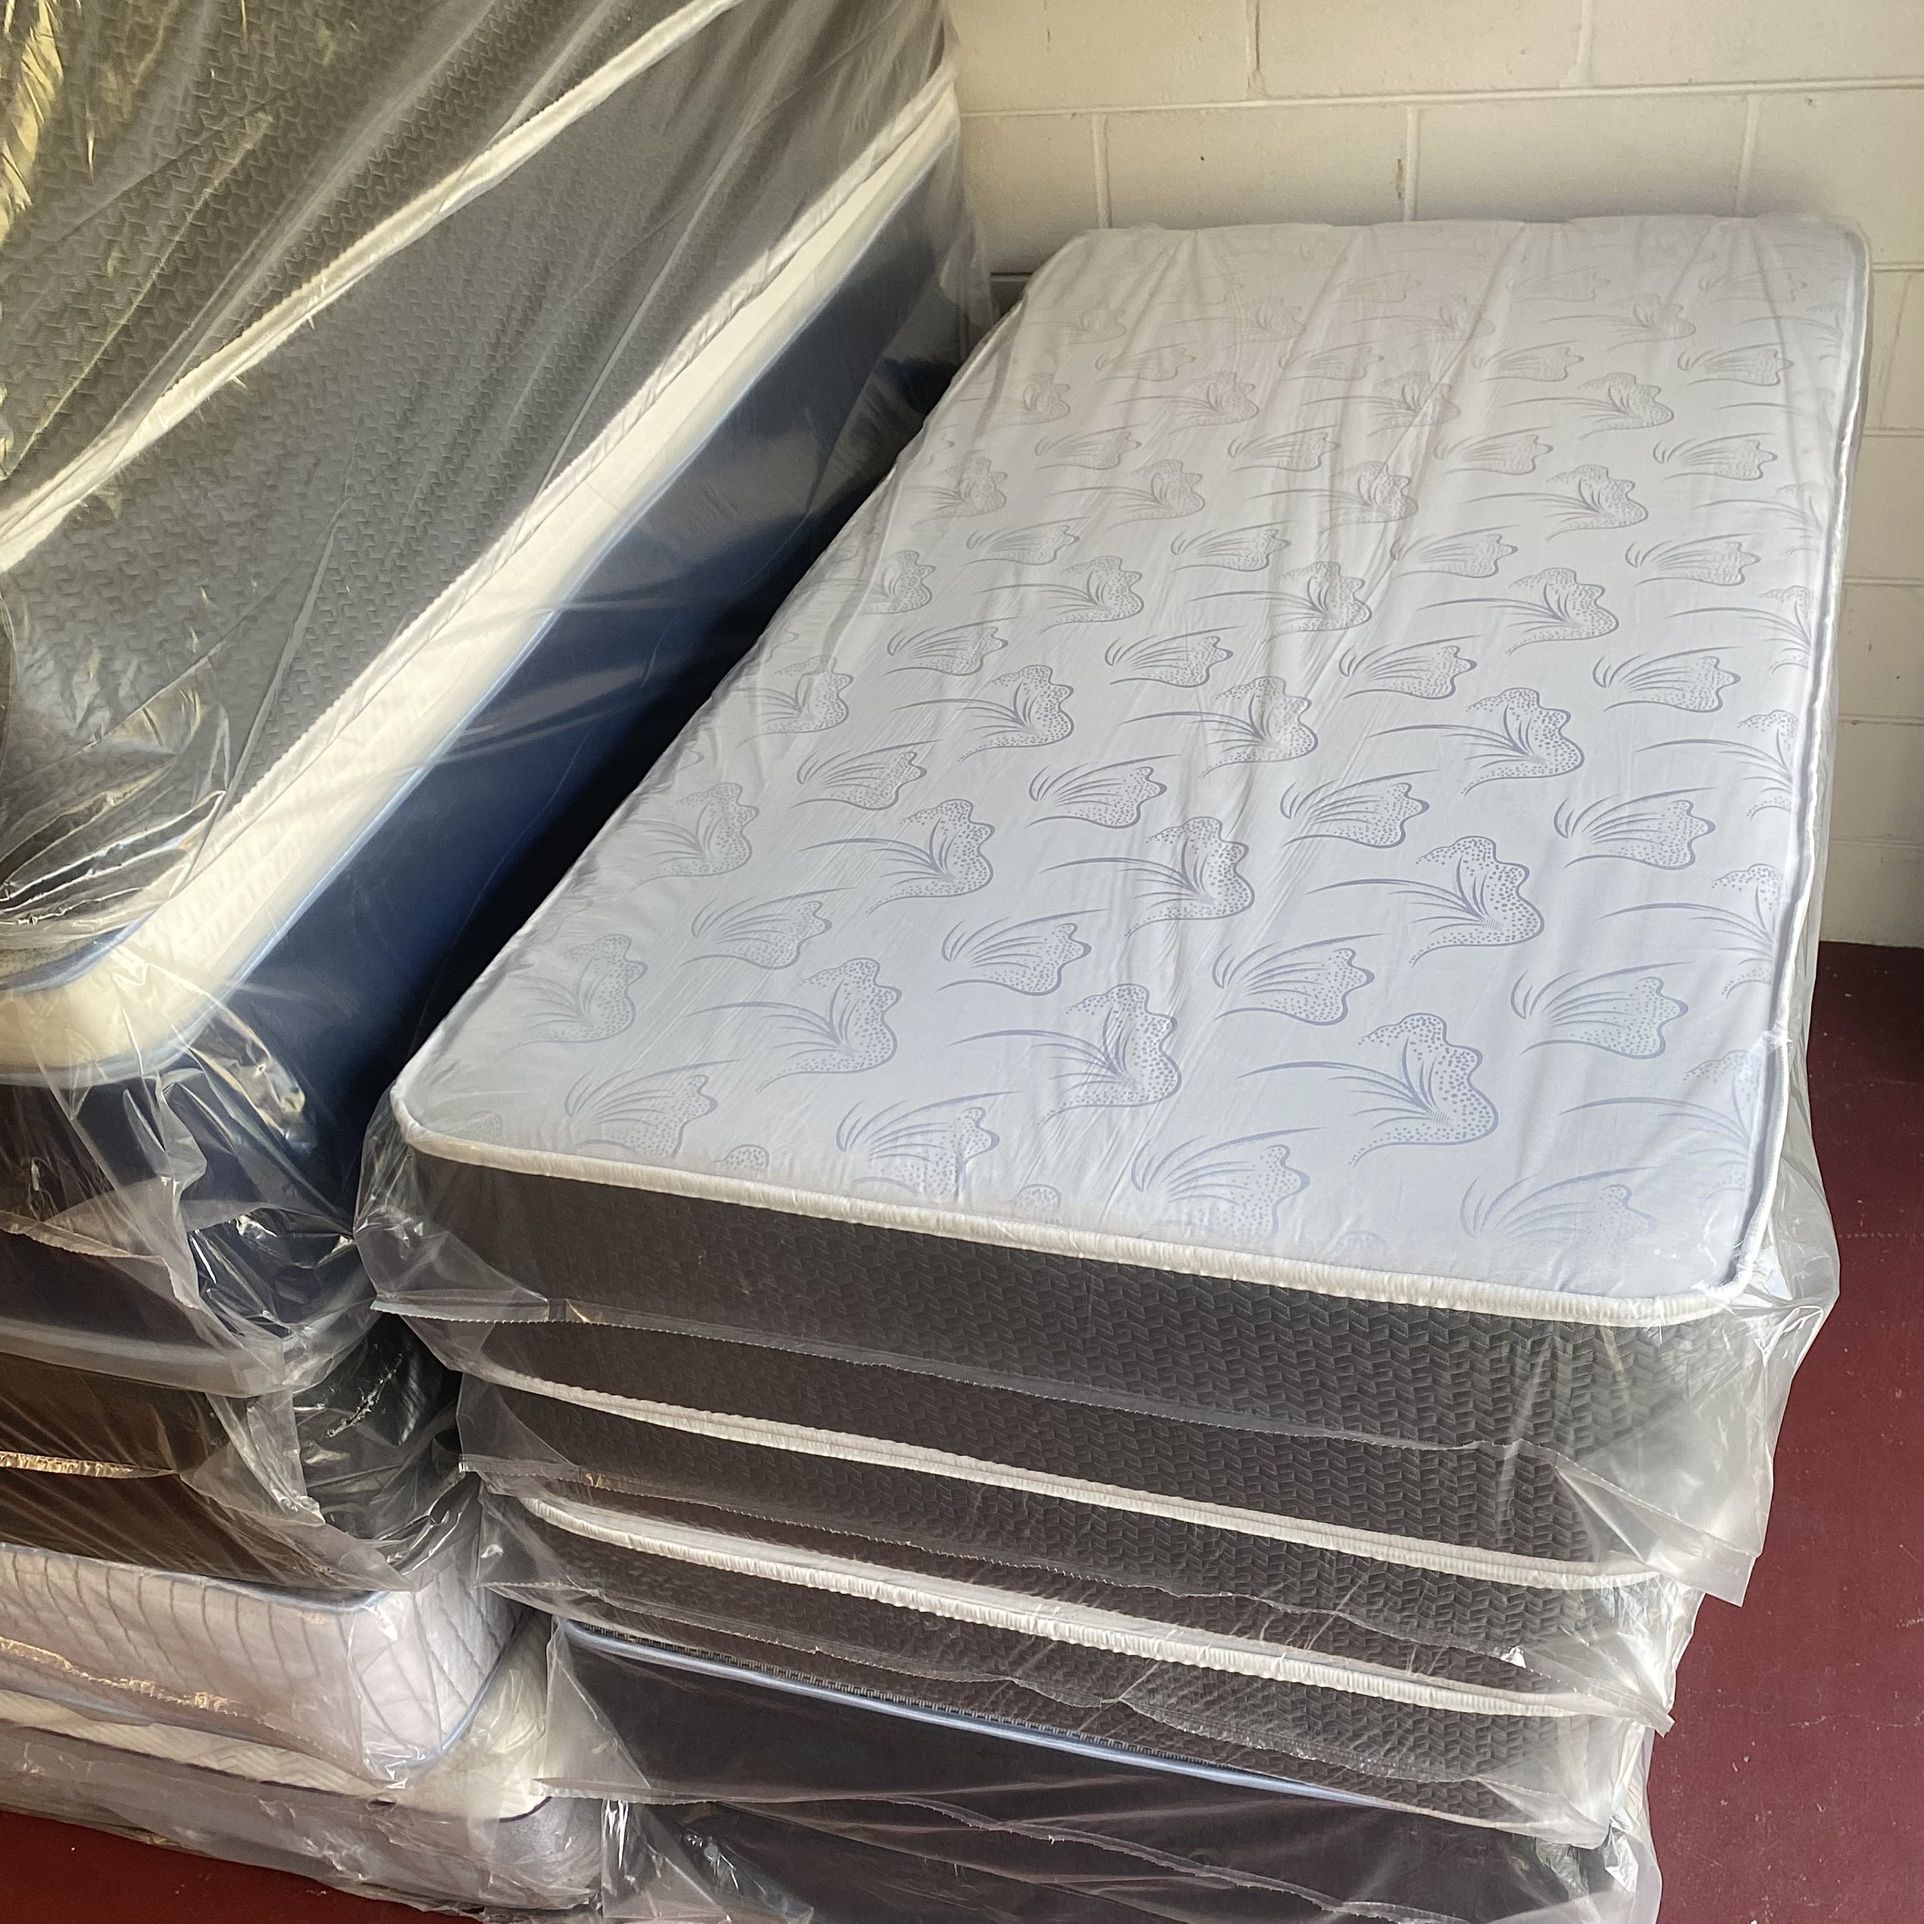 Twin Size Mattress 10” Inches Thick New From Factory Also Available in: Full, Queen, King Same Day Delivery